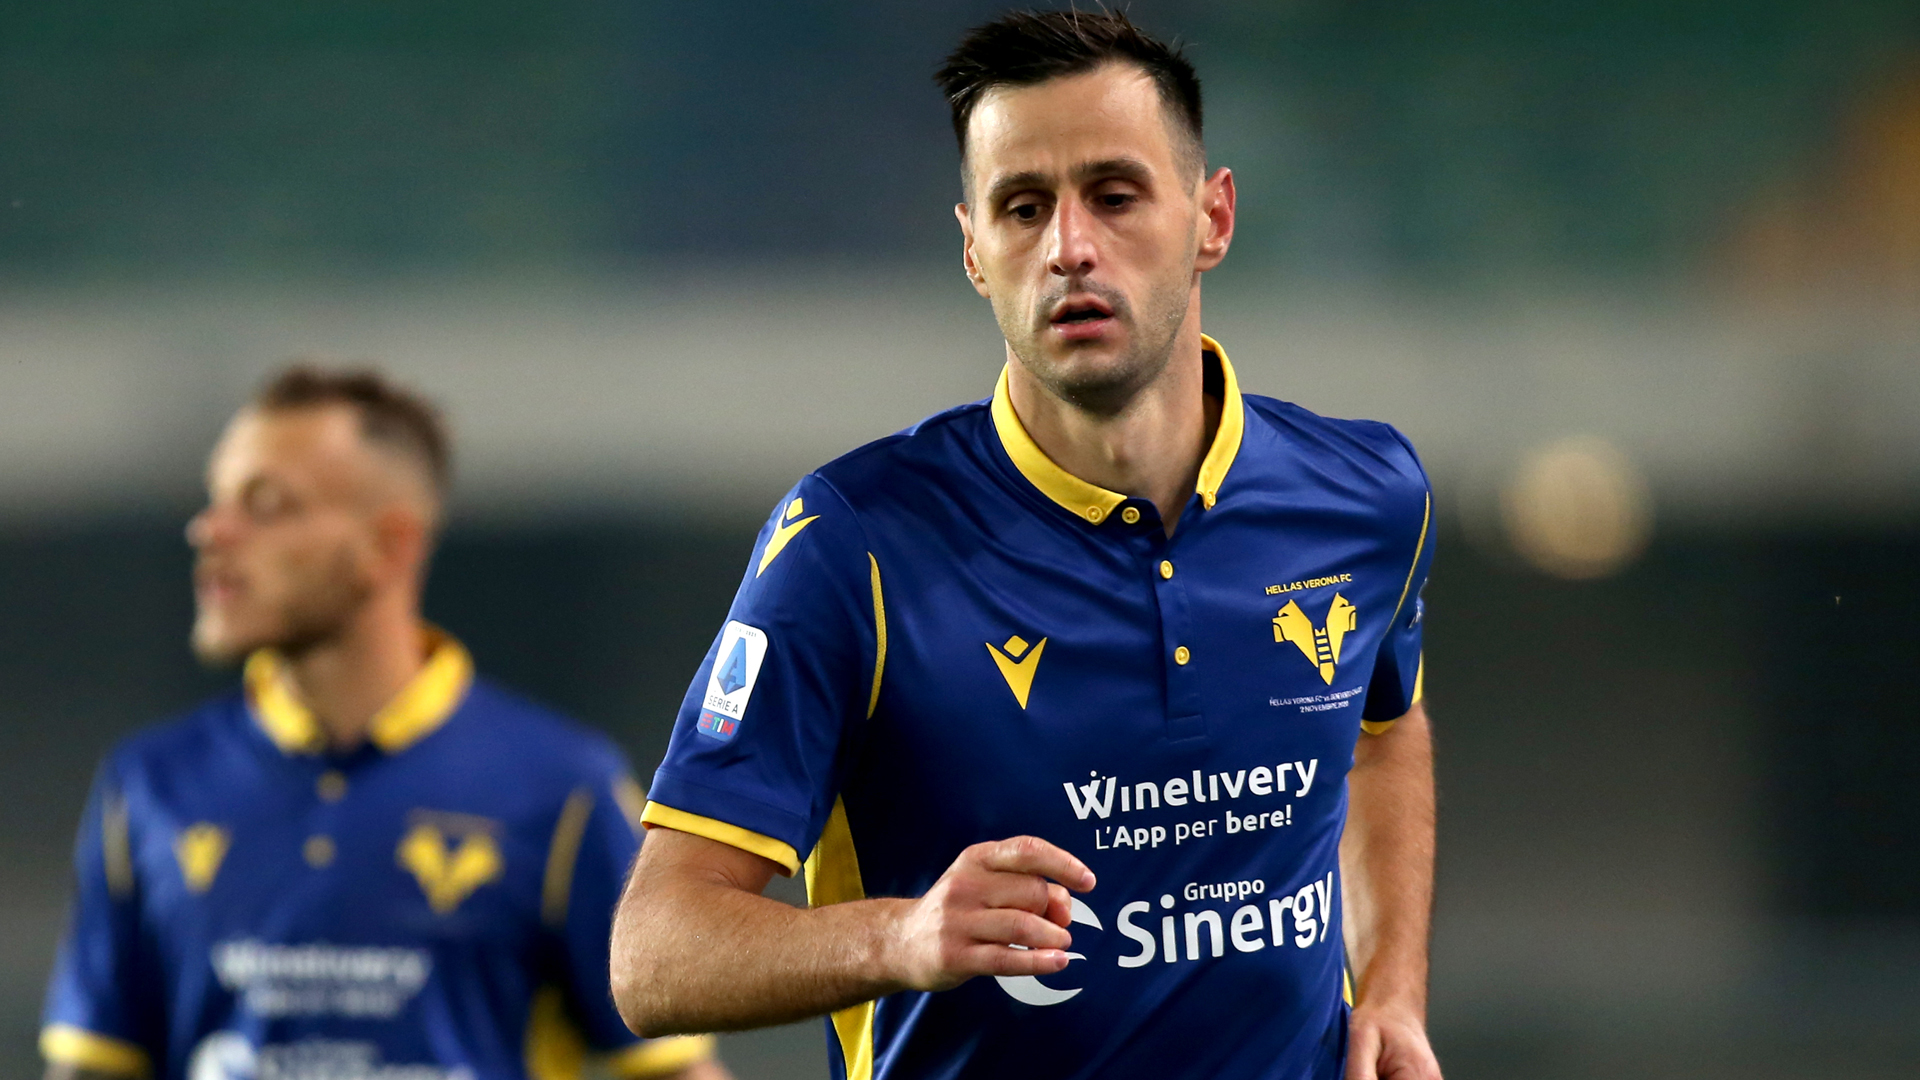 Nikola Kalinic decided terminated his contract with Verona and went back to Hajduk Split, the club where he started his adventure as a professional player